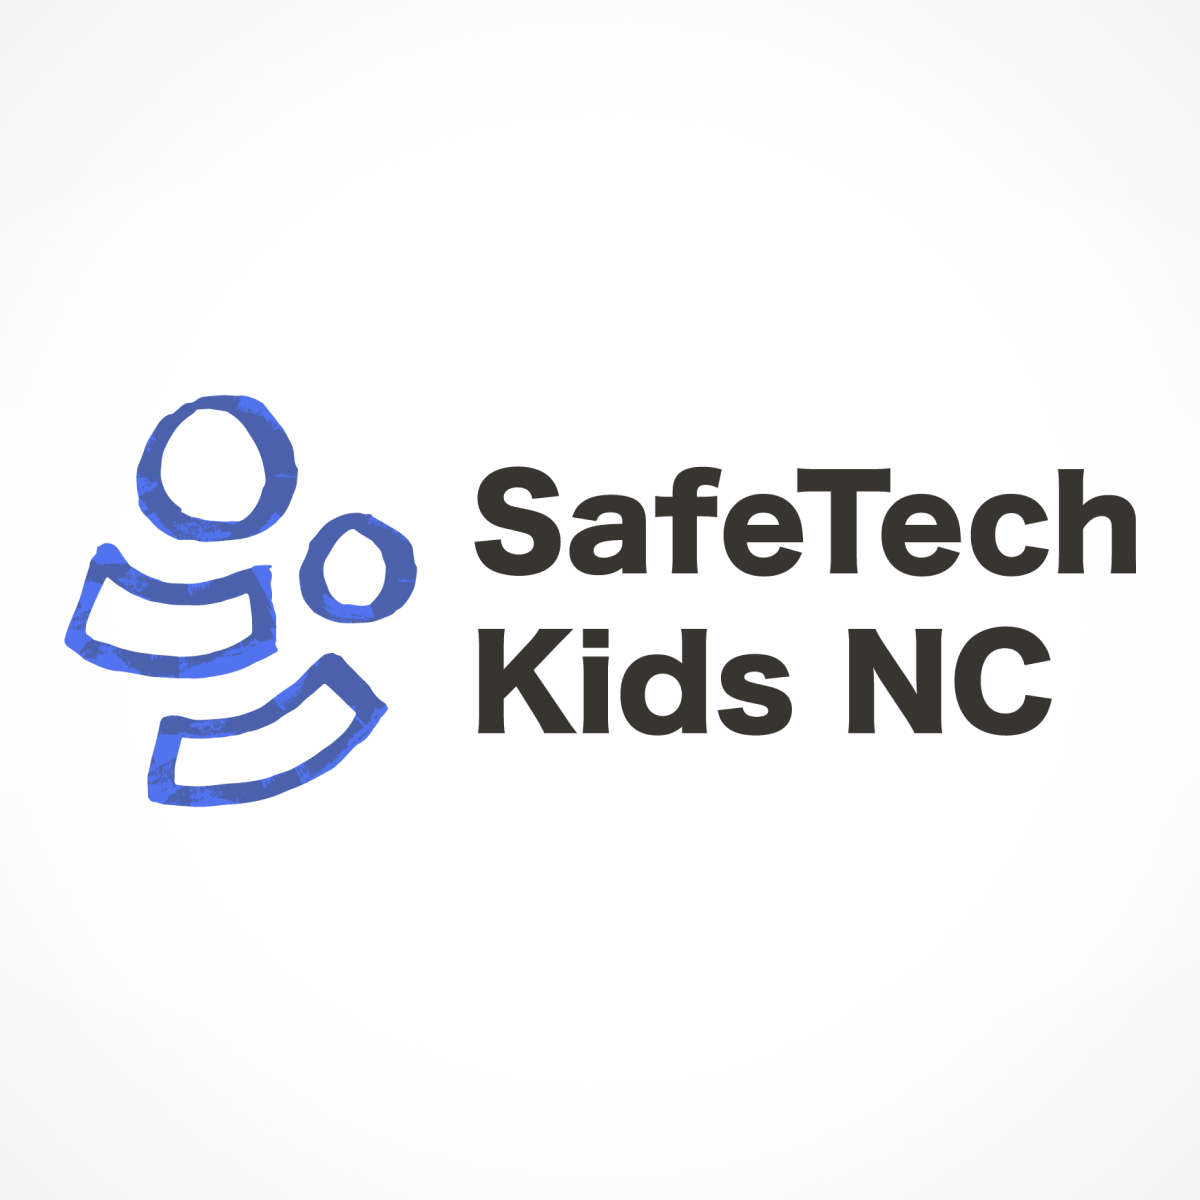 SafeTech Kids NC logo with text